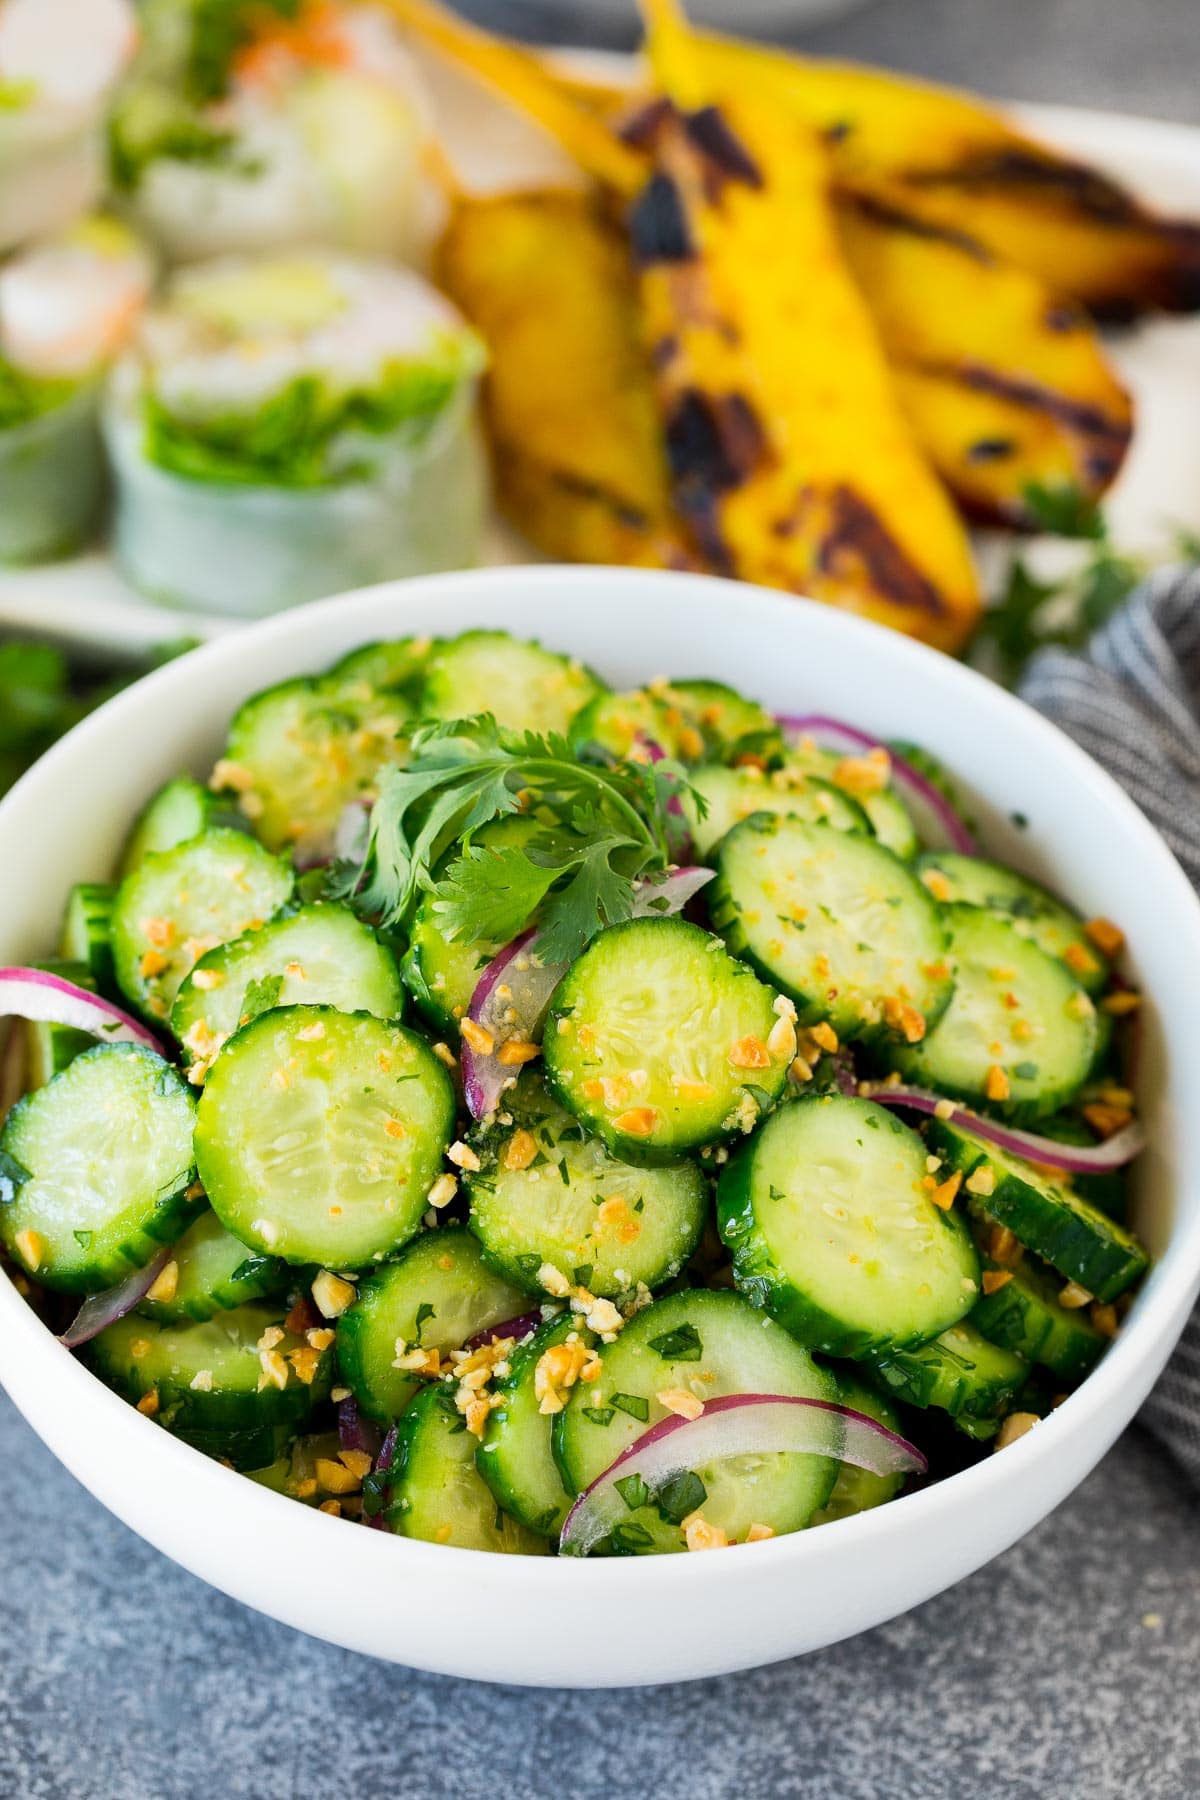 Salad of sliced cucumbers with sesame seeds.